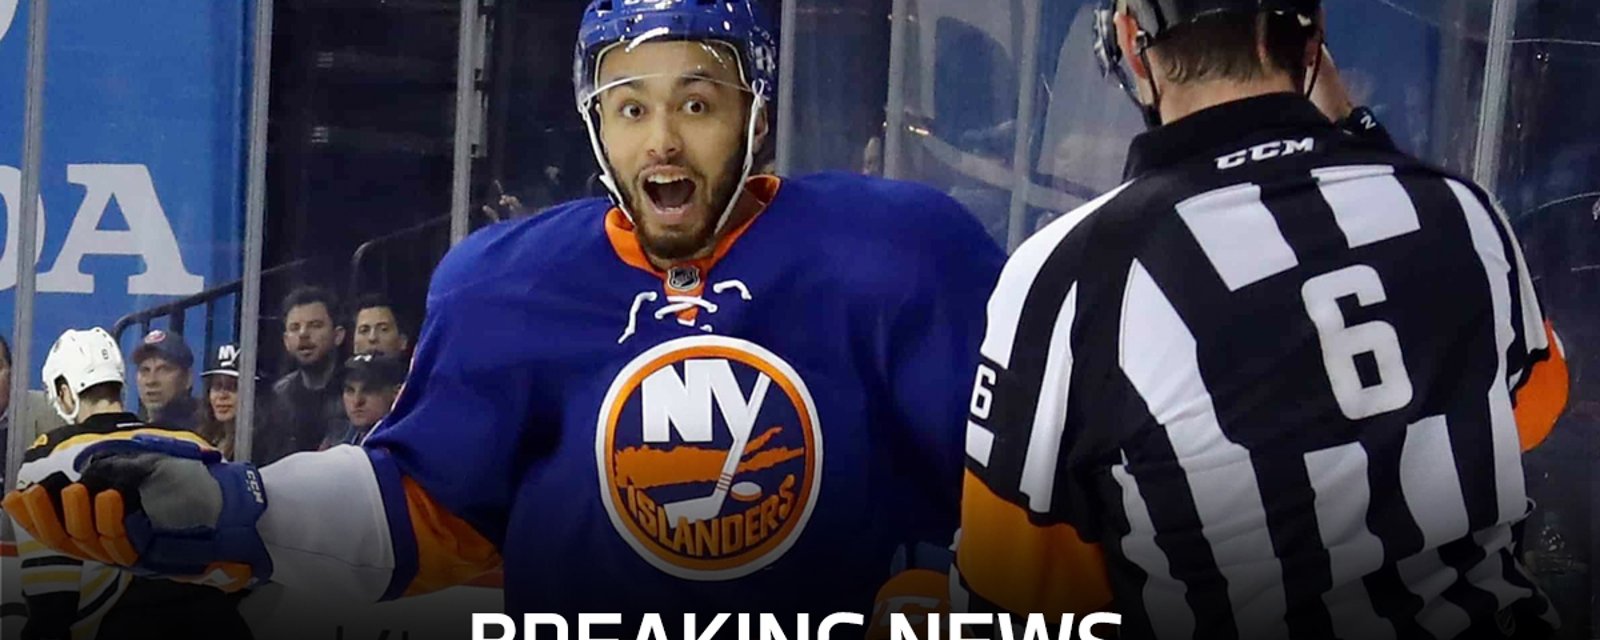 Josh Ho-Sang officially gets a second chance at an NHL career